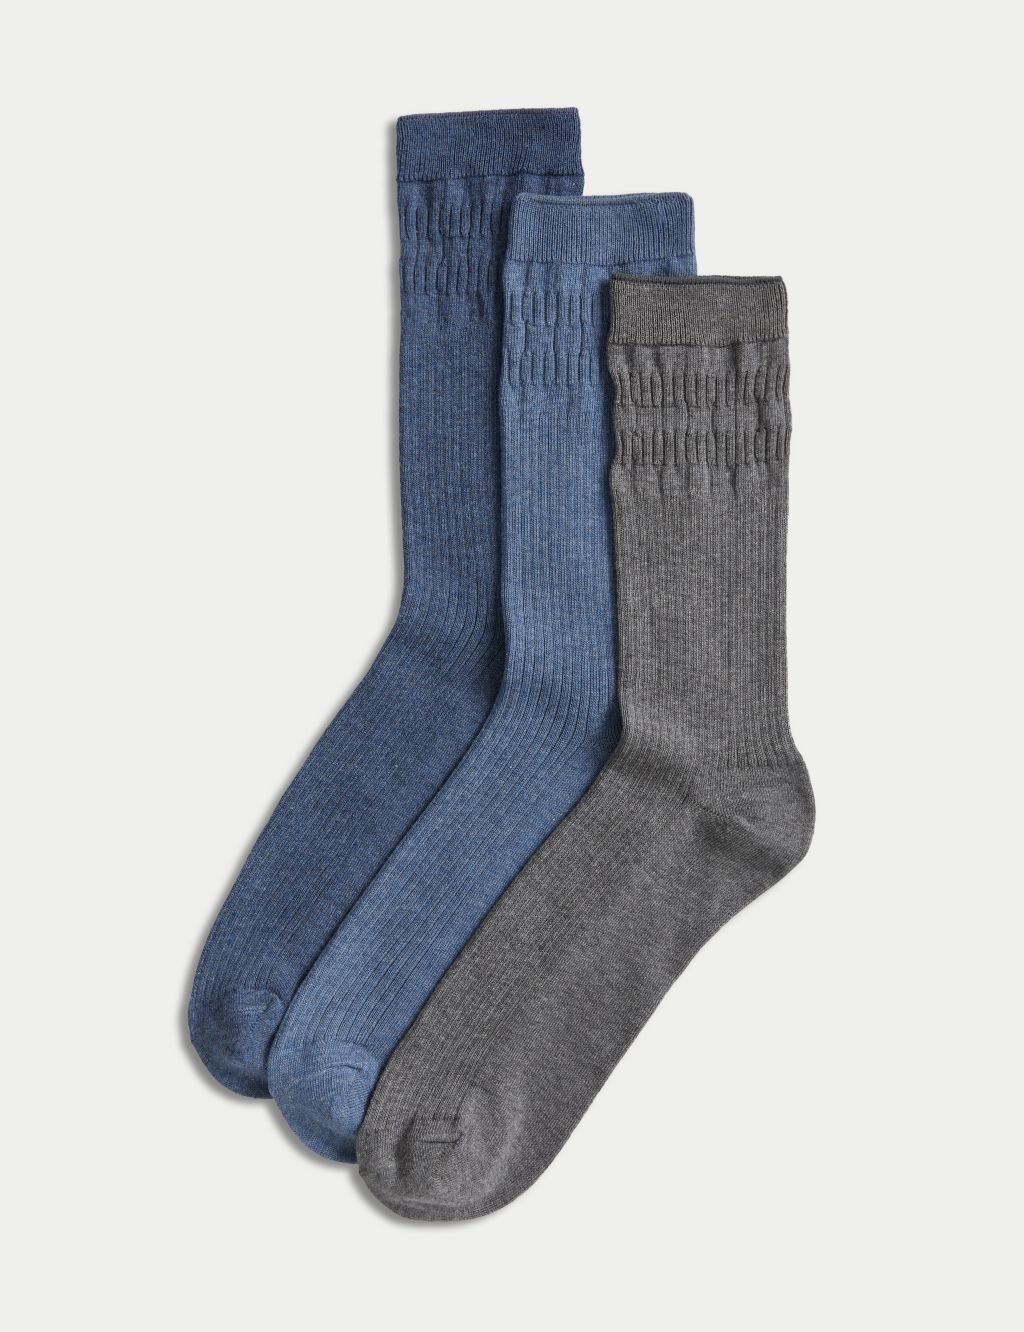 M&S menswear essentials - new underwear and socks from Marks & Spencer  Autograph collection — The Rakish Gent